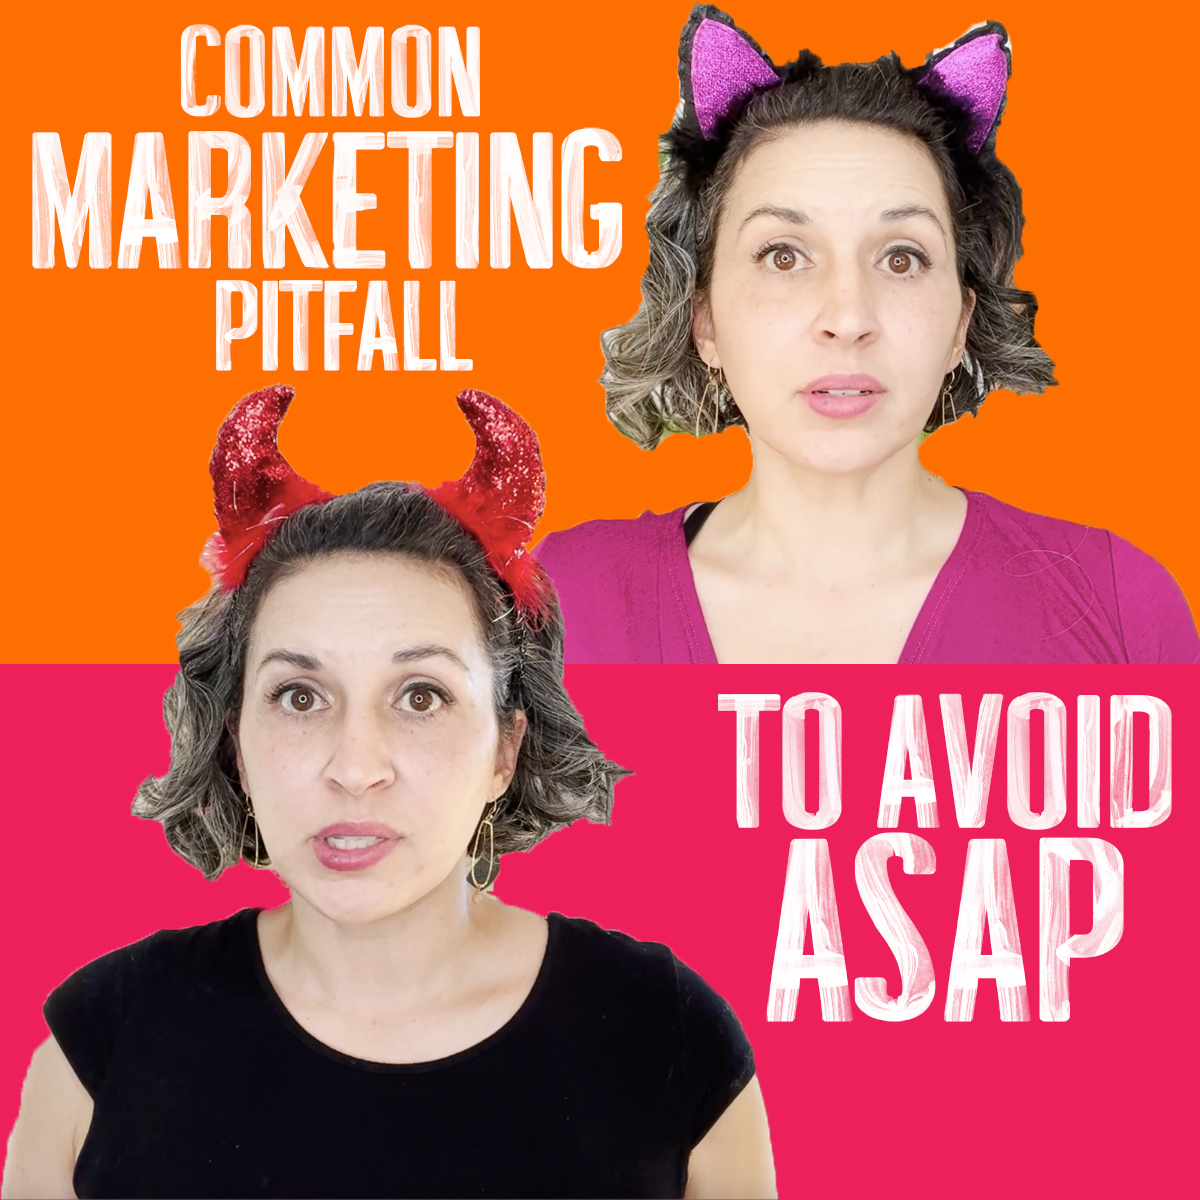 No Ideal Client: Common Marketing Pitfall to Avoid ASAP